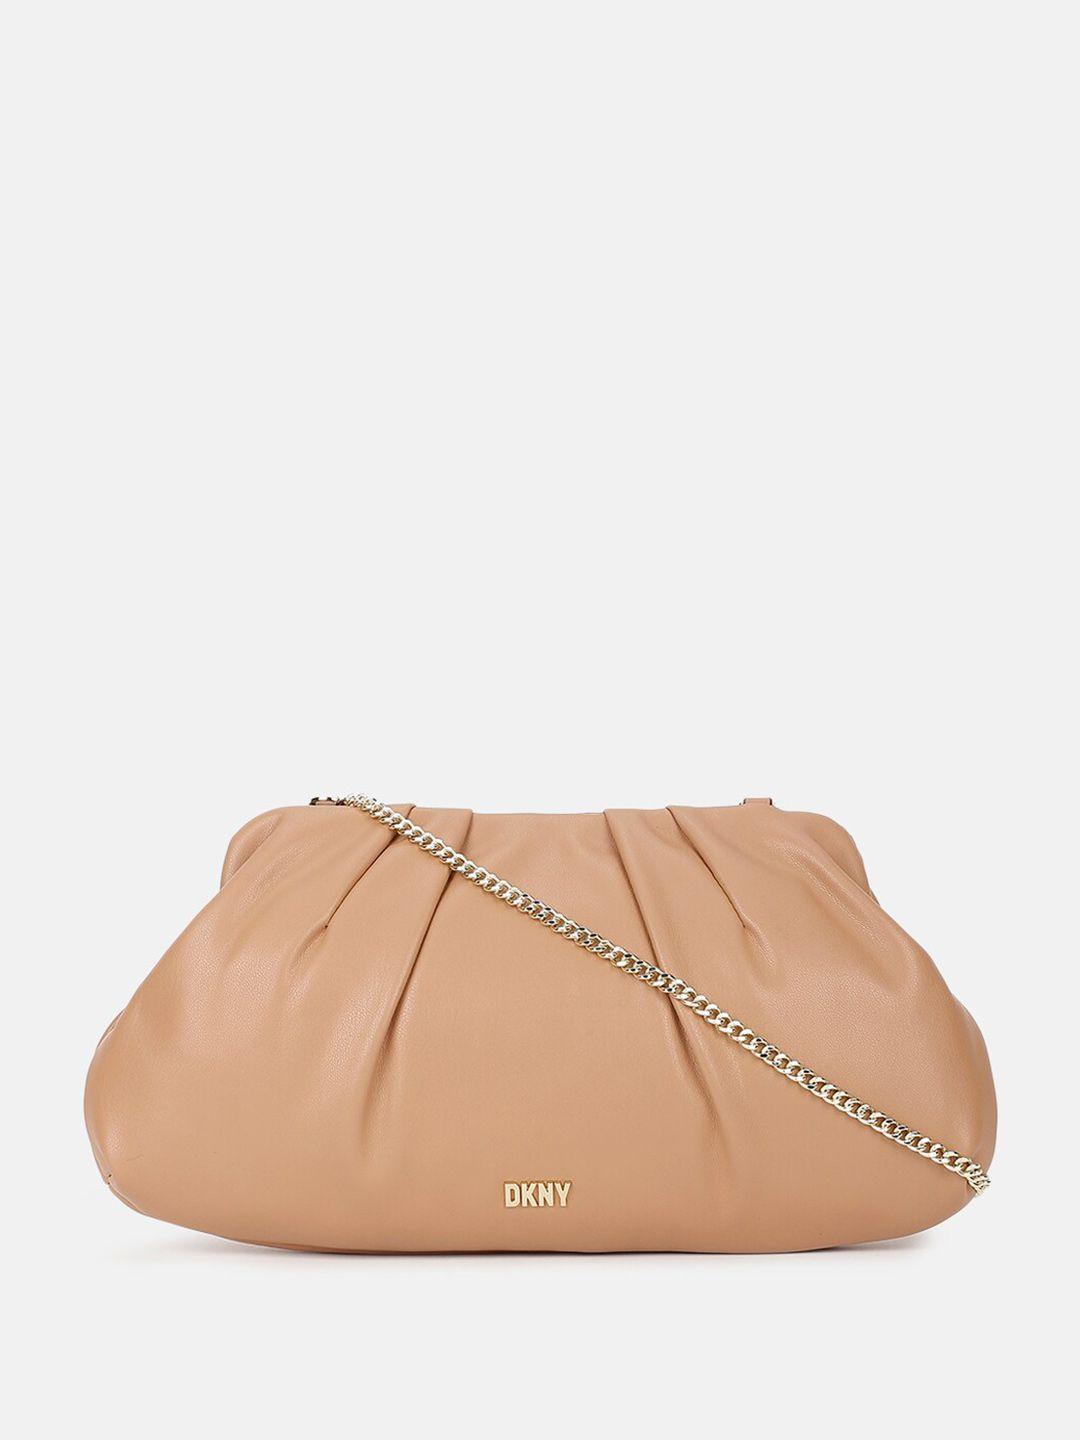 dkny purse clutch with shoulder strap